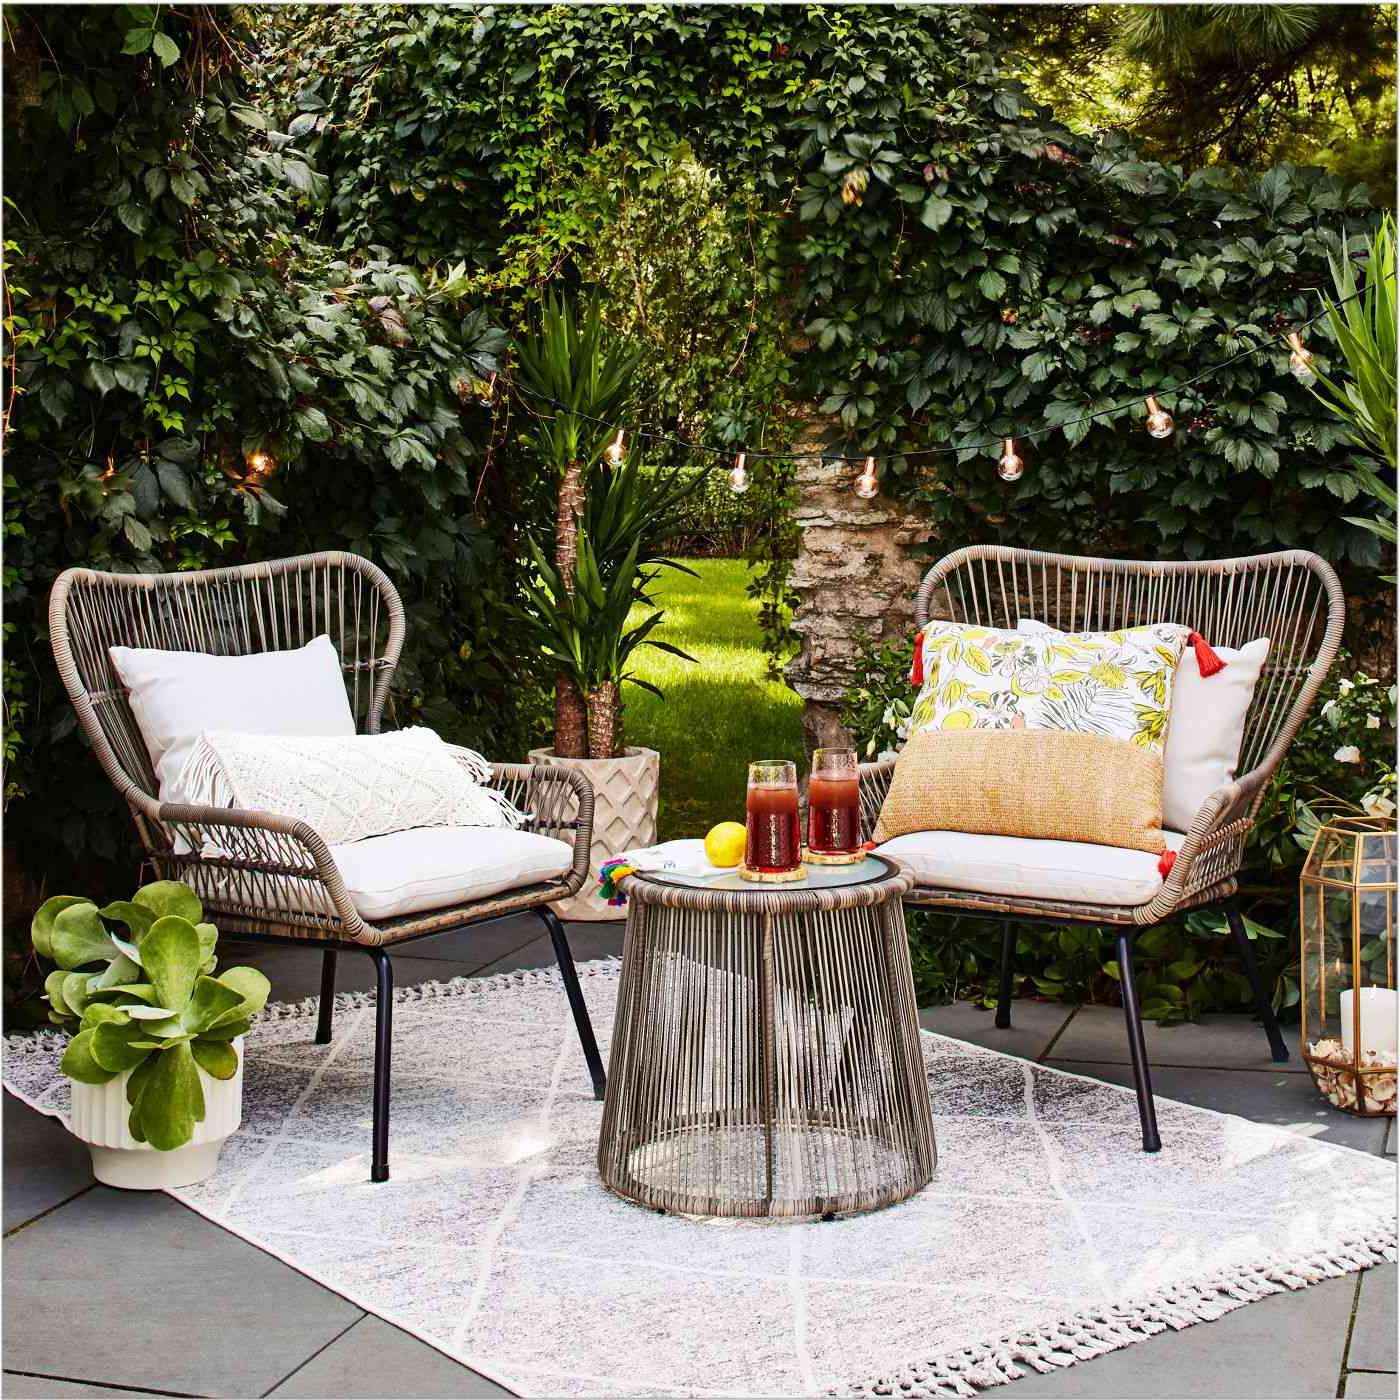 Backyard Porch Garden Patio Furniture Set Inside Most Current The Best Outdoor Furniture For Small Spaces (View 12 of 15)